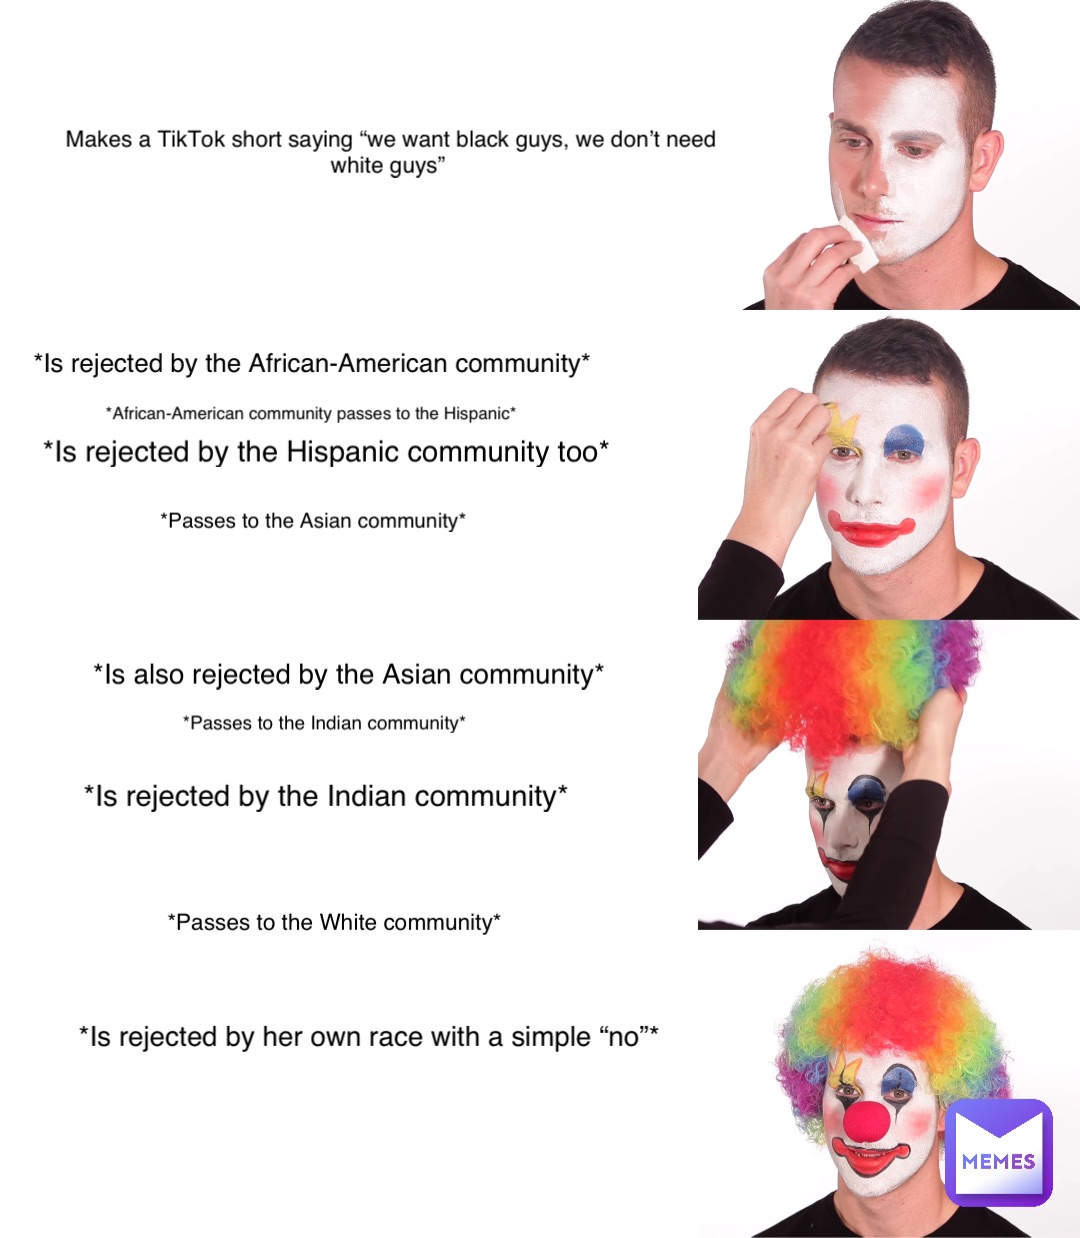 Makes a TikTok short saying “we want black guys, we don’t need white guys” *Is rejected by the African-American community* *Is rejected by the Hispanic community too* *Is also rejected by the Asian community* *African-American community passes to the Hispanic* *Passes to the Asian community* *Passes to the Indian community* *Is rejected by the Indian community* *Passes to the White community* *Is rejected by her own race with a simple “no”*